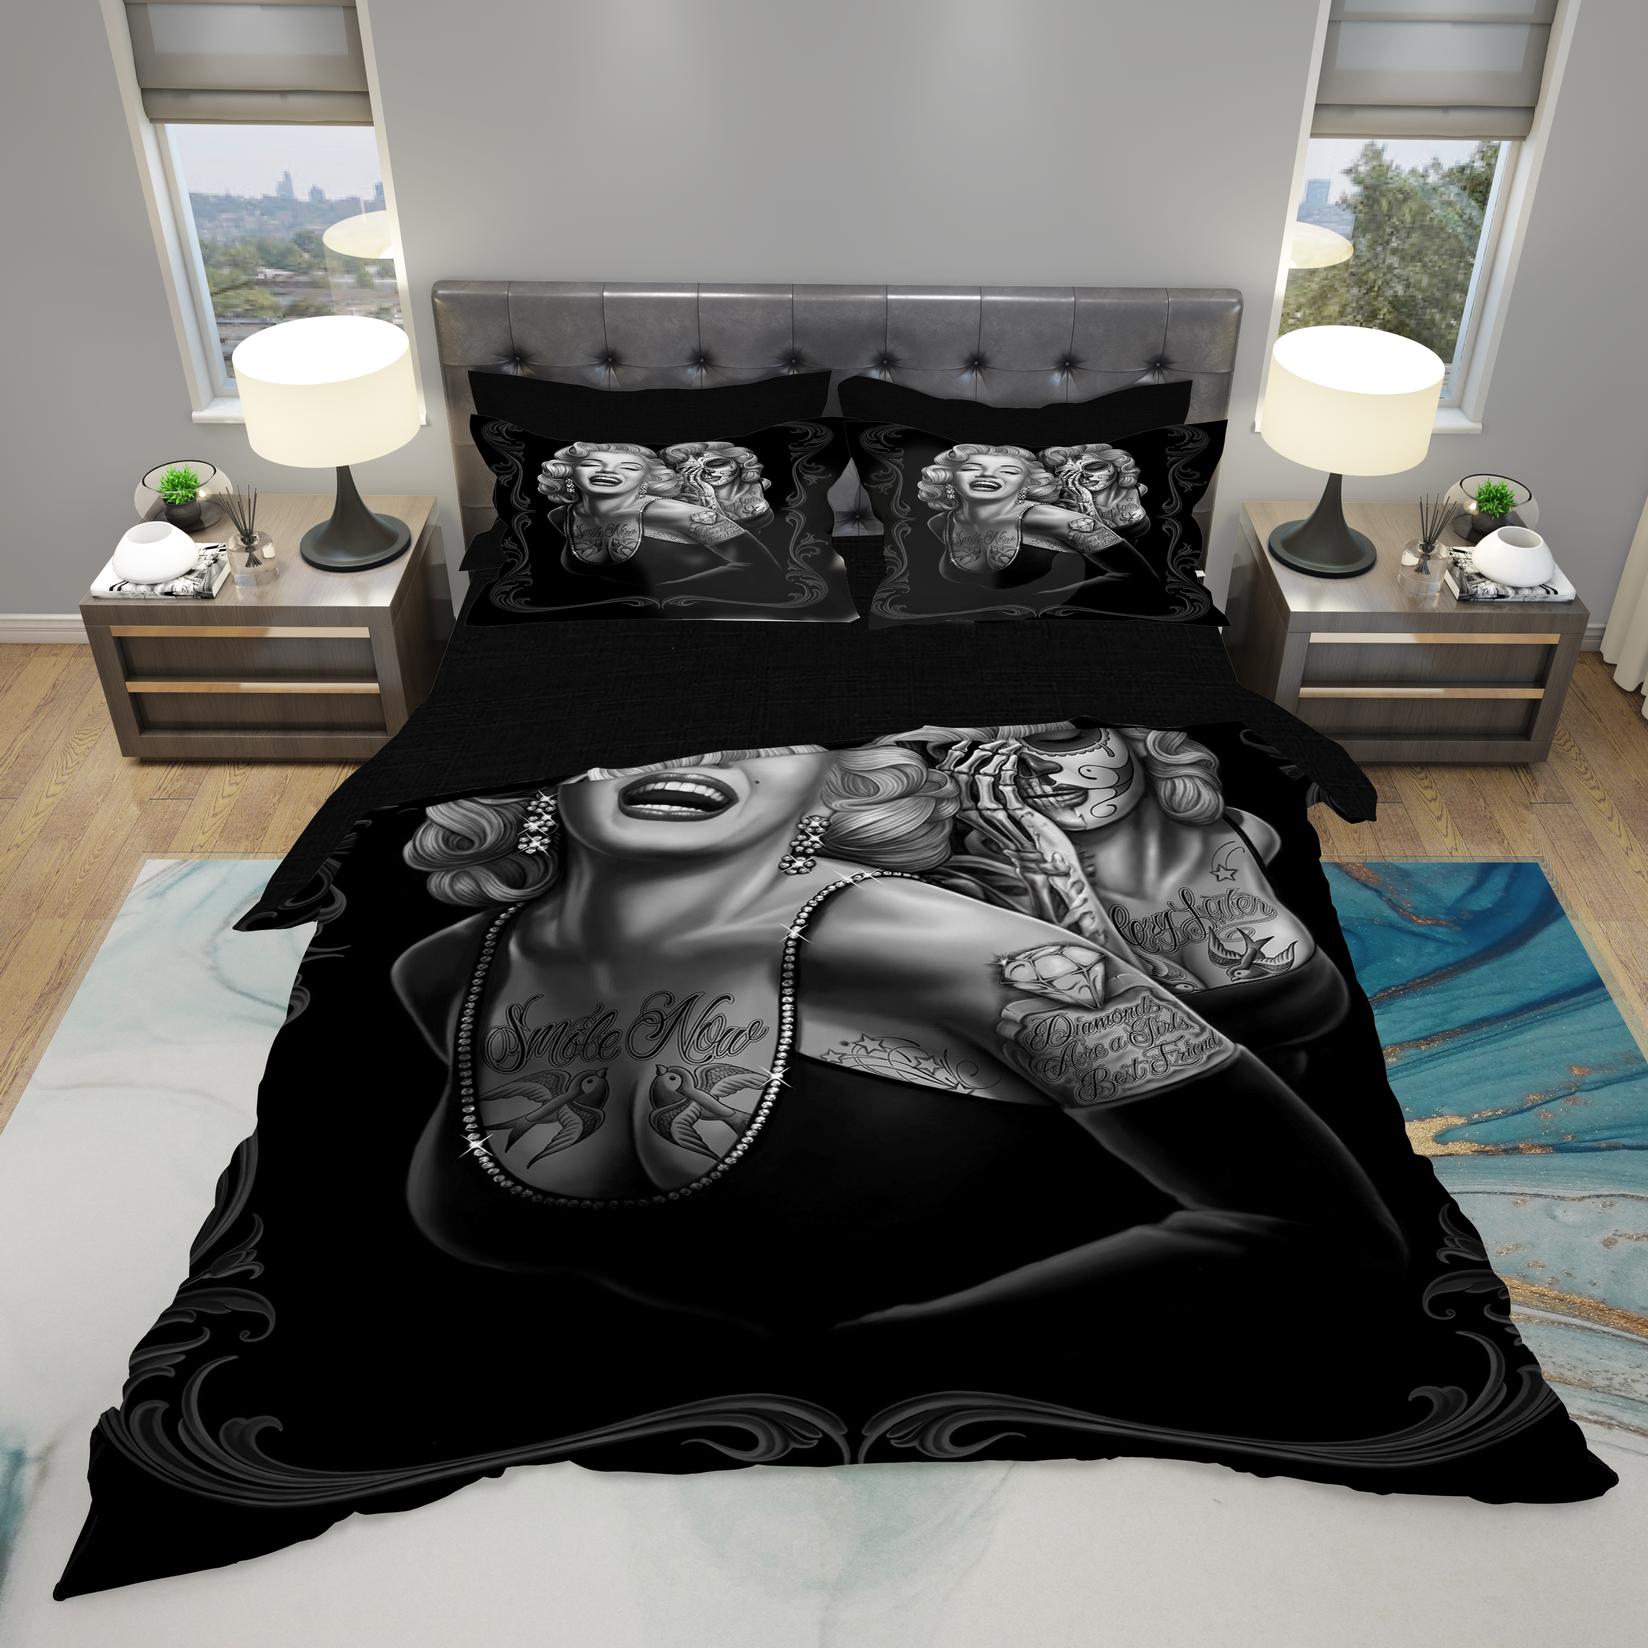 Selected image for MEY HOME Posteljina Marilyn Monroe 3D 200x220cm crna